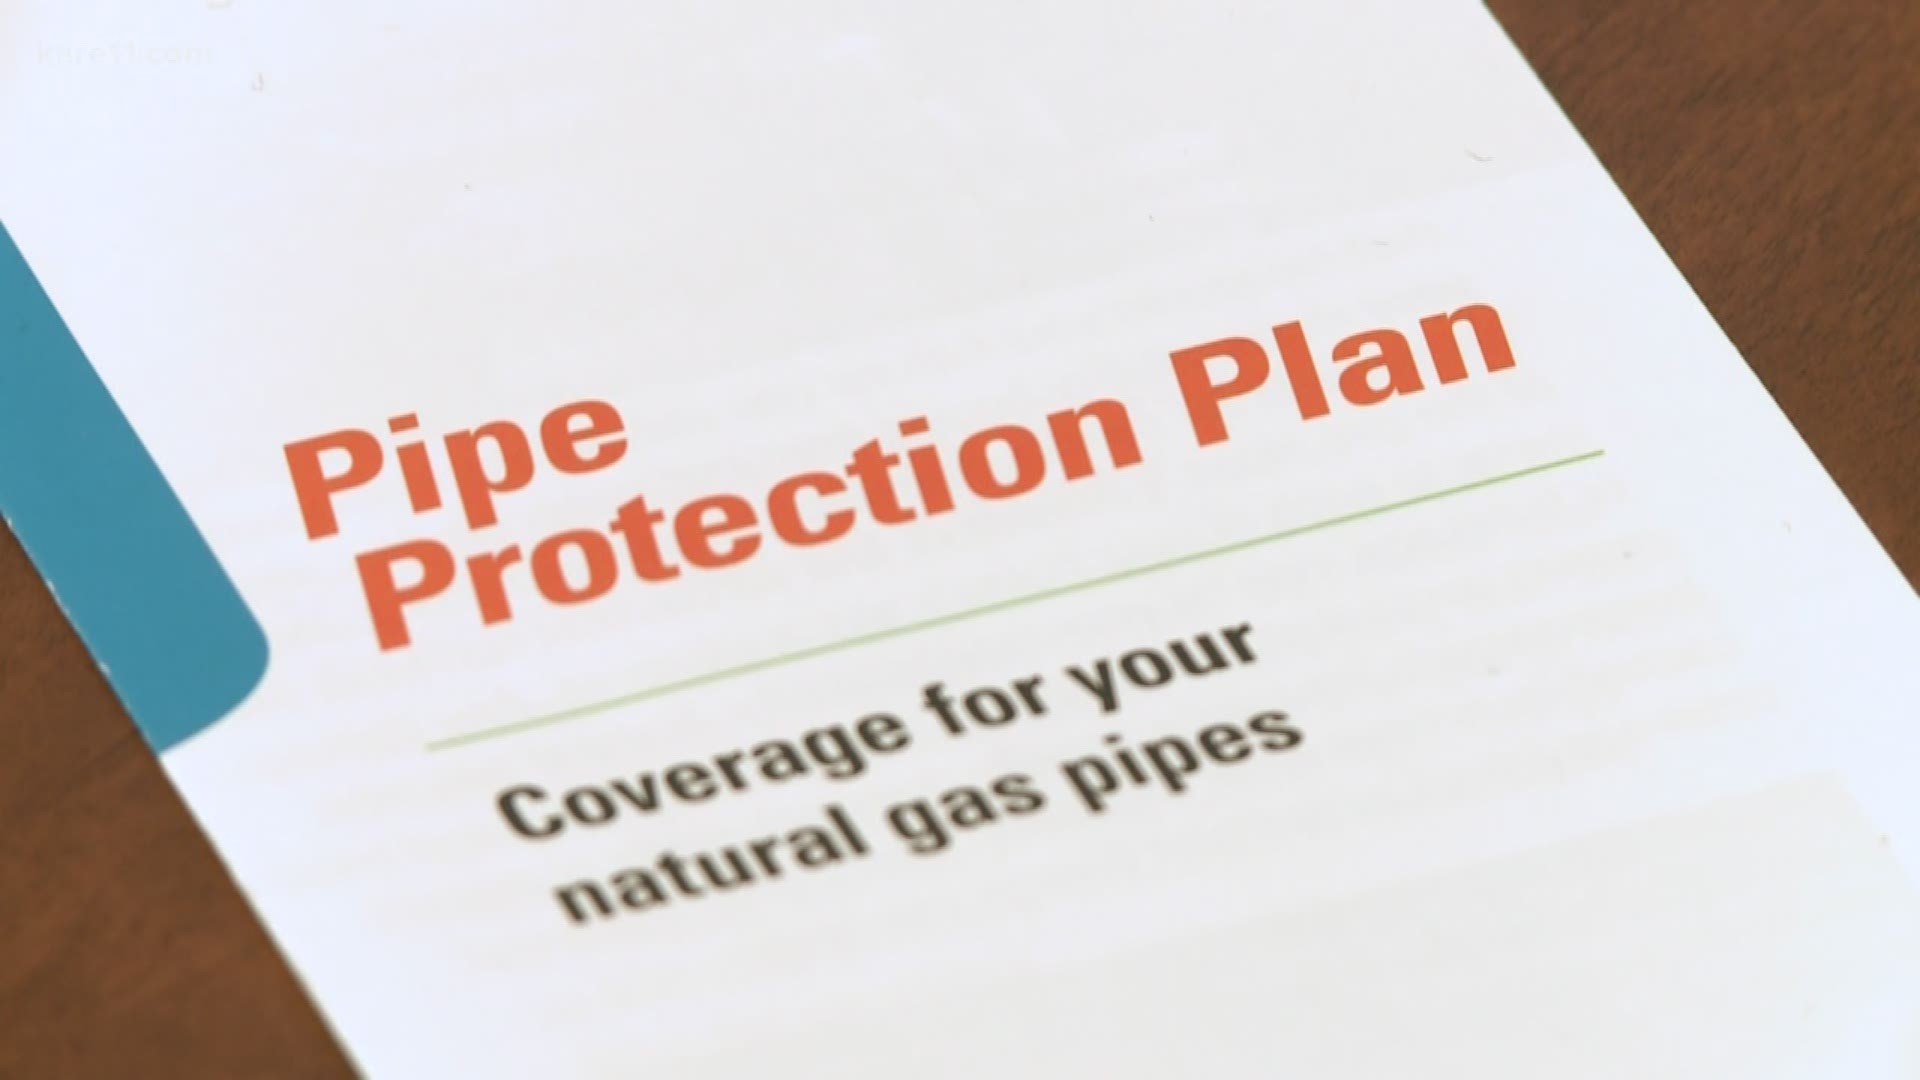 Gas pipe protection Worth your money?